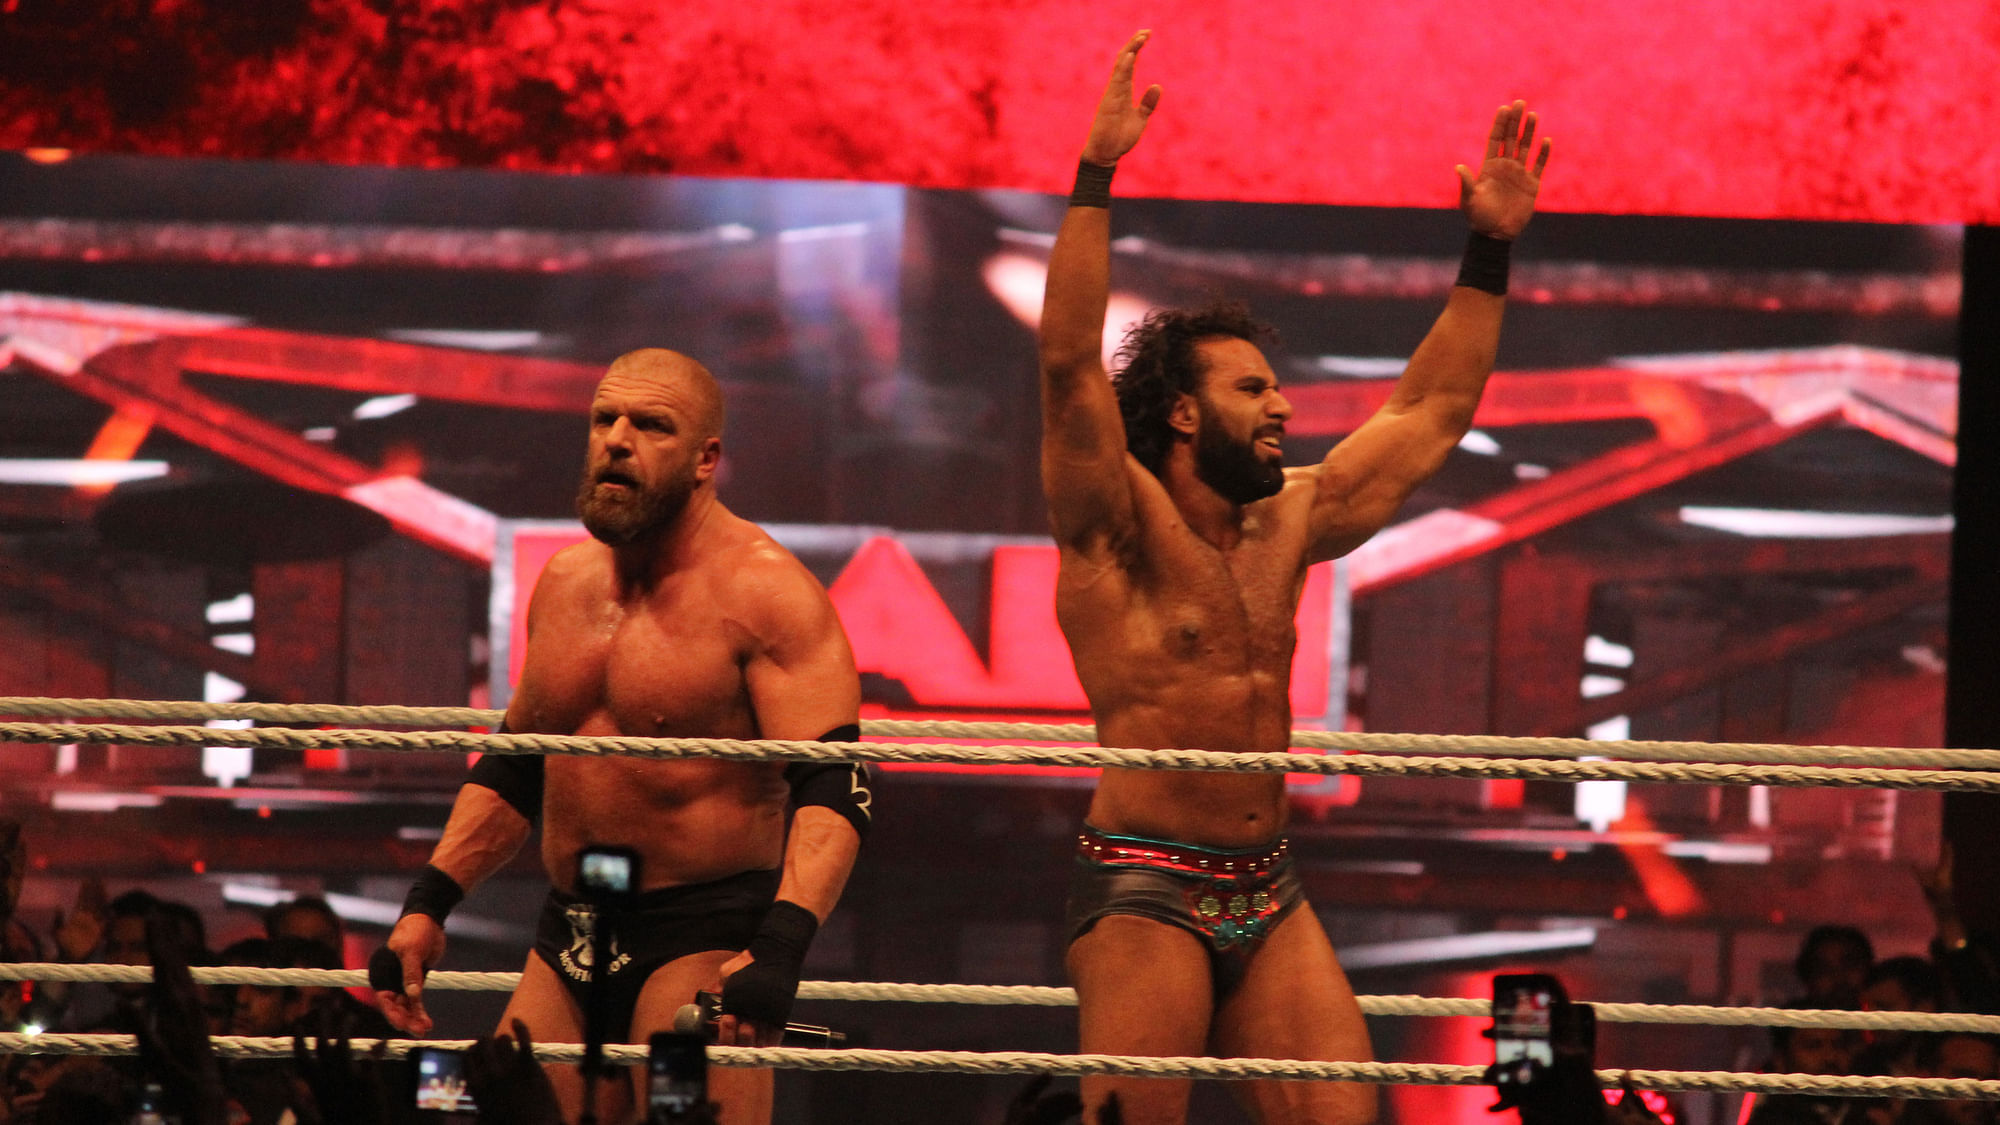 Triple H and Jinder Mahal gesture to the crowd after their fight at the WWE event in New Delhi on Saturday.&nbsp;